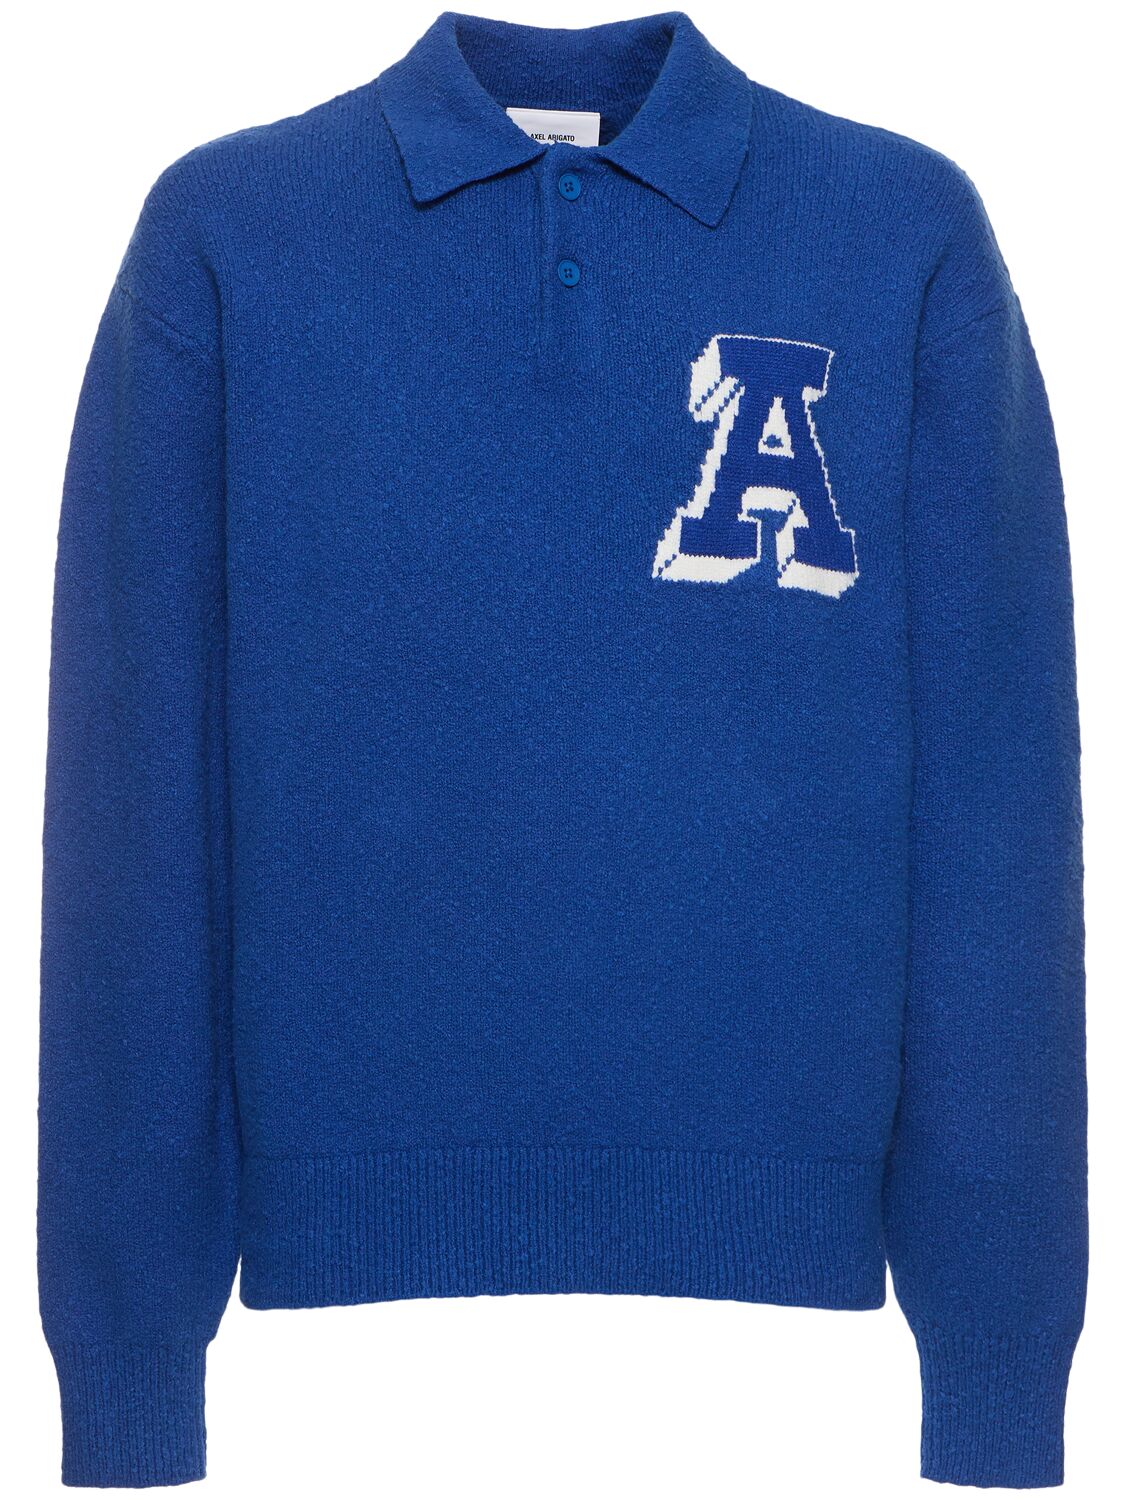 Image of Team Polo Cotton Blend Sweater